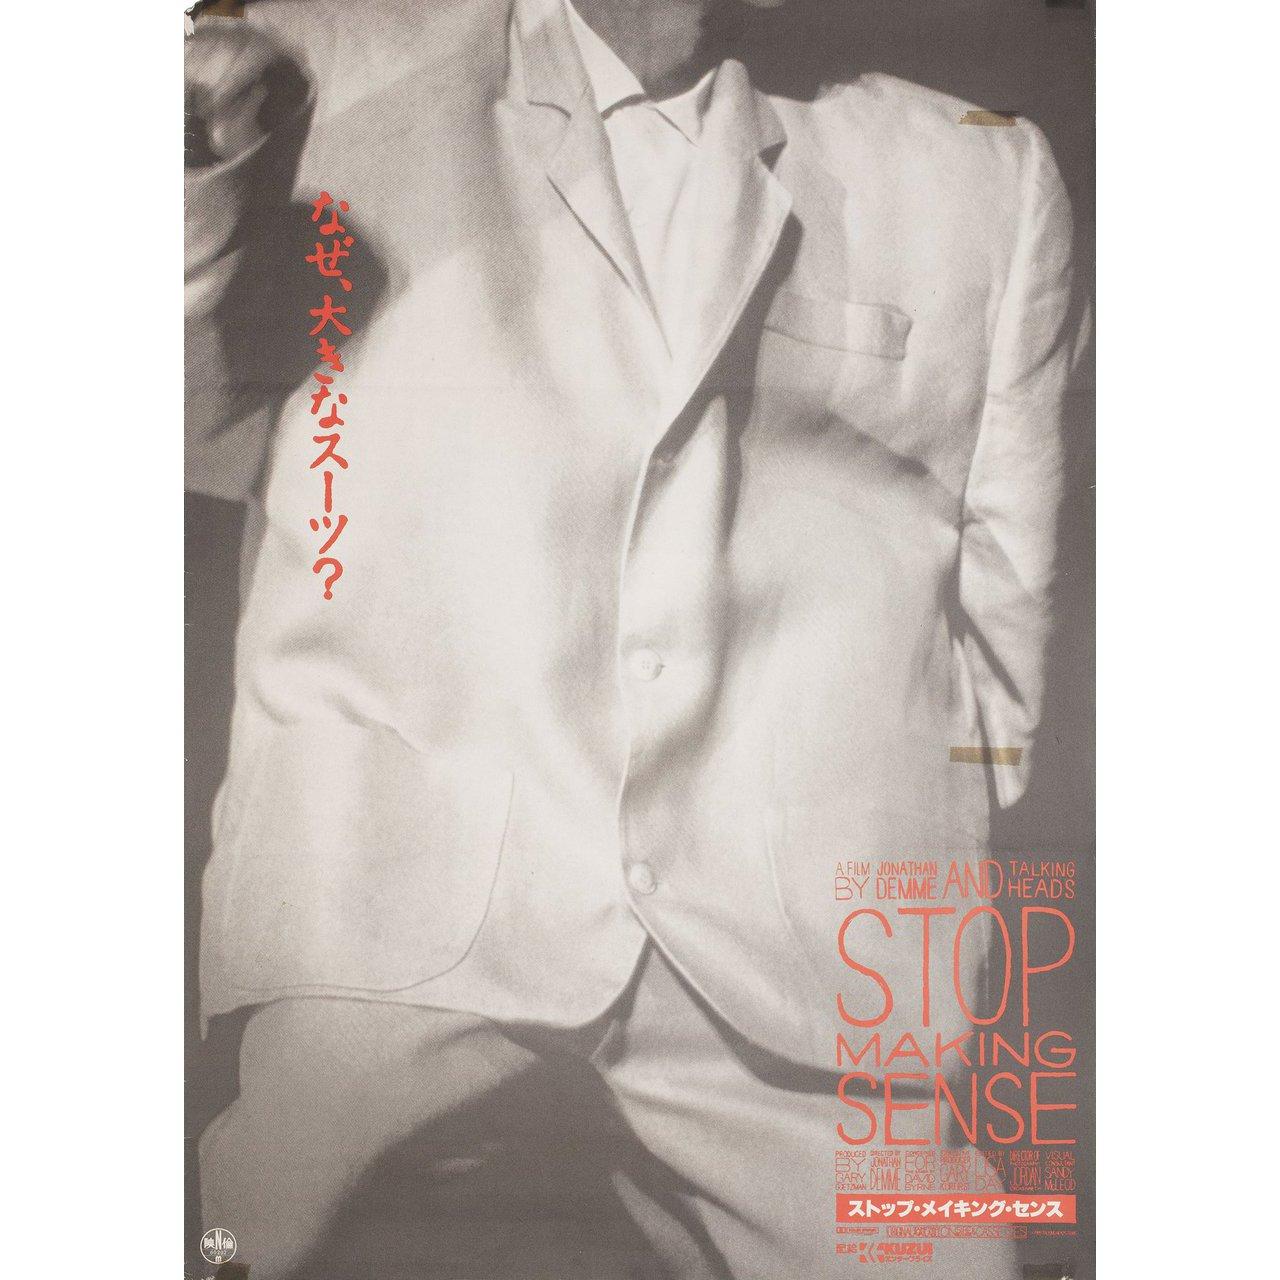 Original 1984 Japanese B2 poster by Adelle Lutz / Pablo Ferro for the documentary film Stop Making Sense directed by Jonathan Demme with David Byrne / Bernie Worrell / Alex Weir / Steven Scales / Lynn Mabry. Very Good-Fine condition, tri-fold. Many